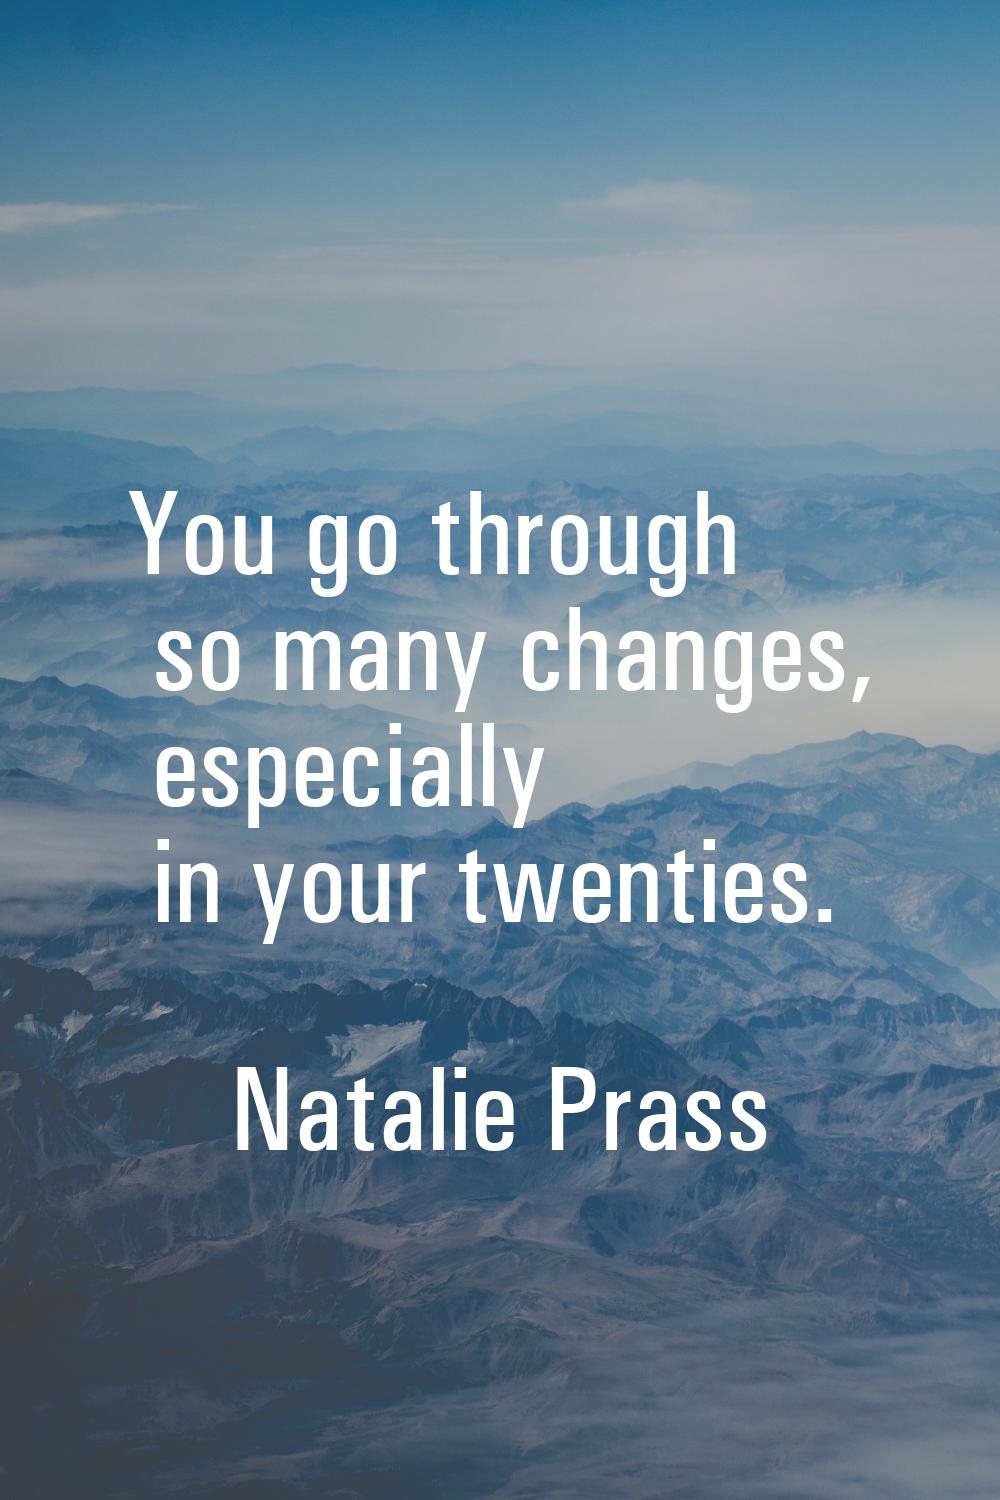 You go through so many changes, especially in your twenties.